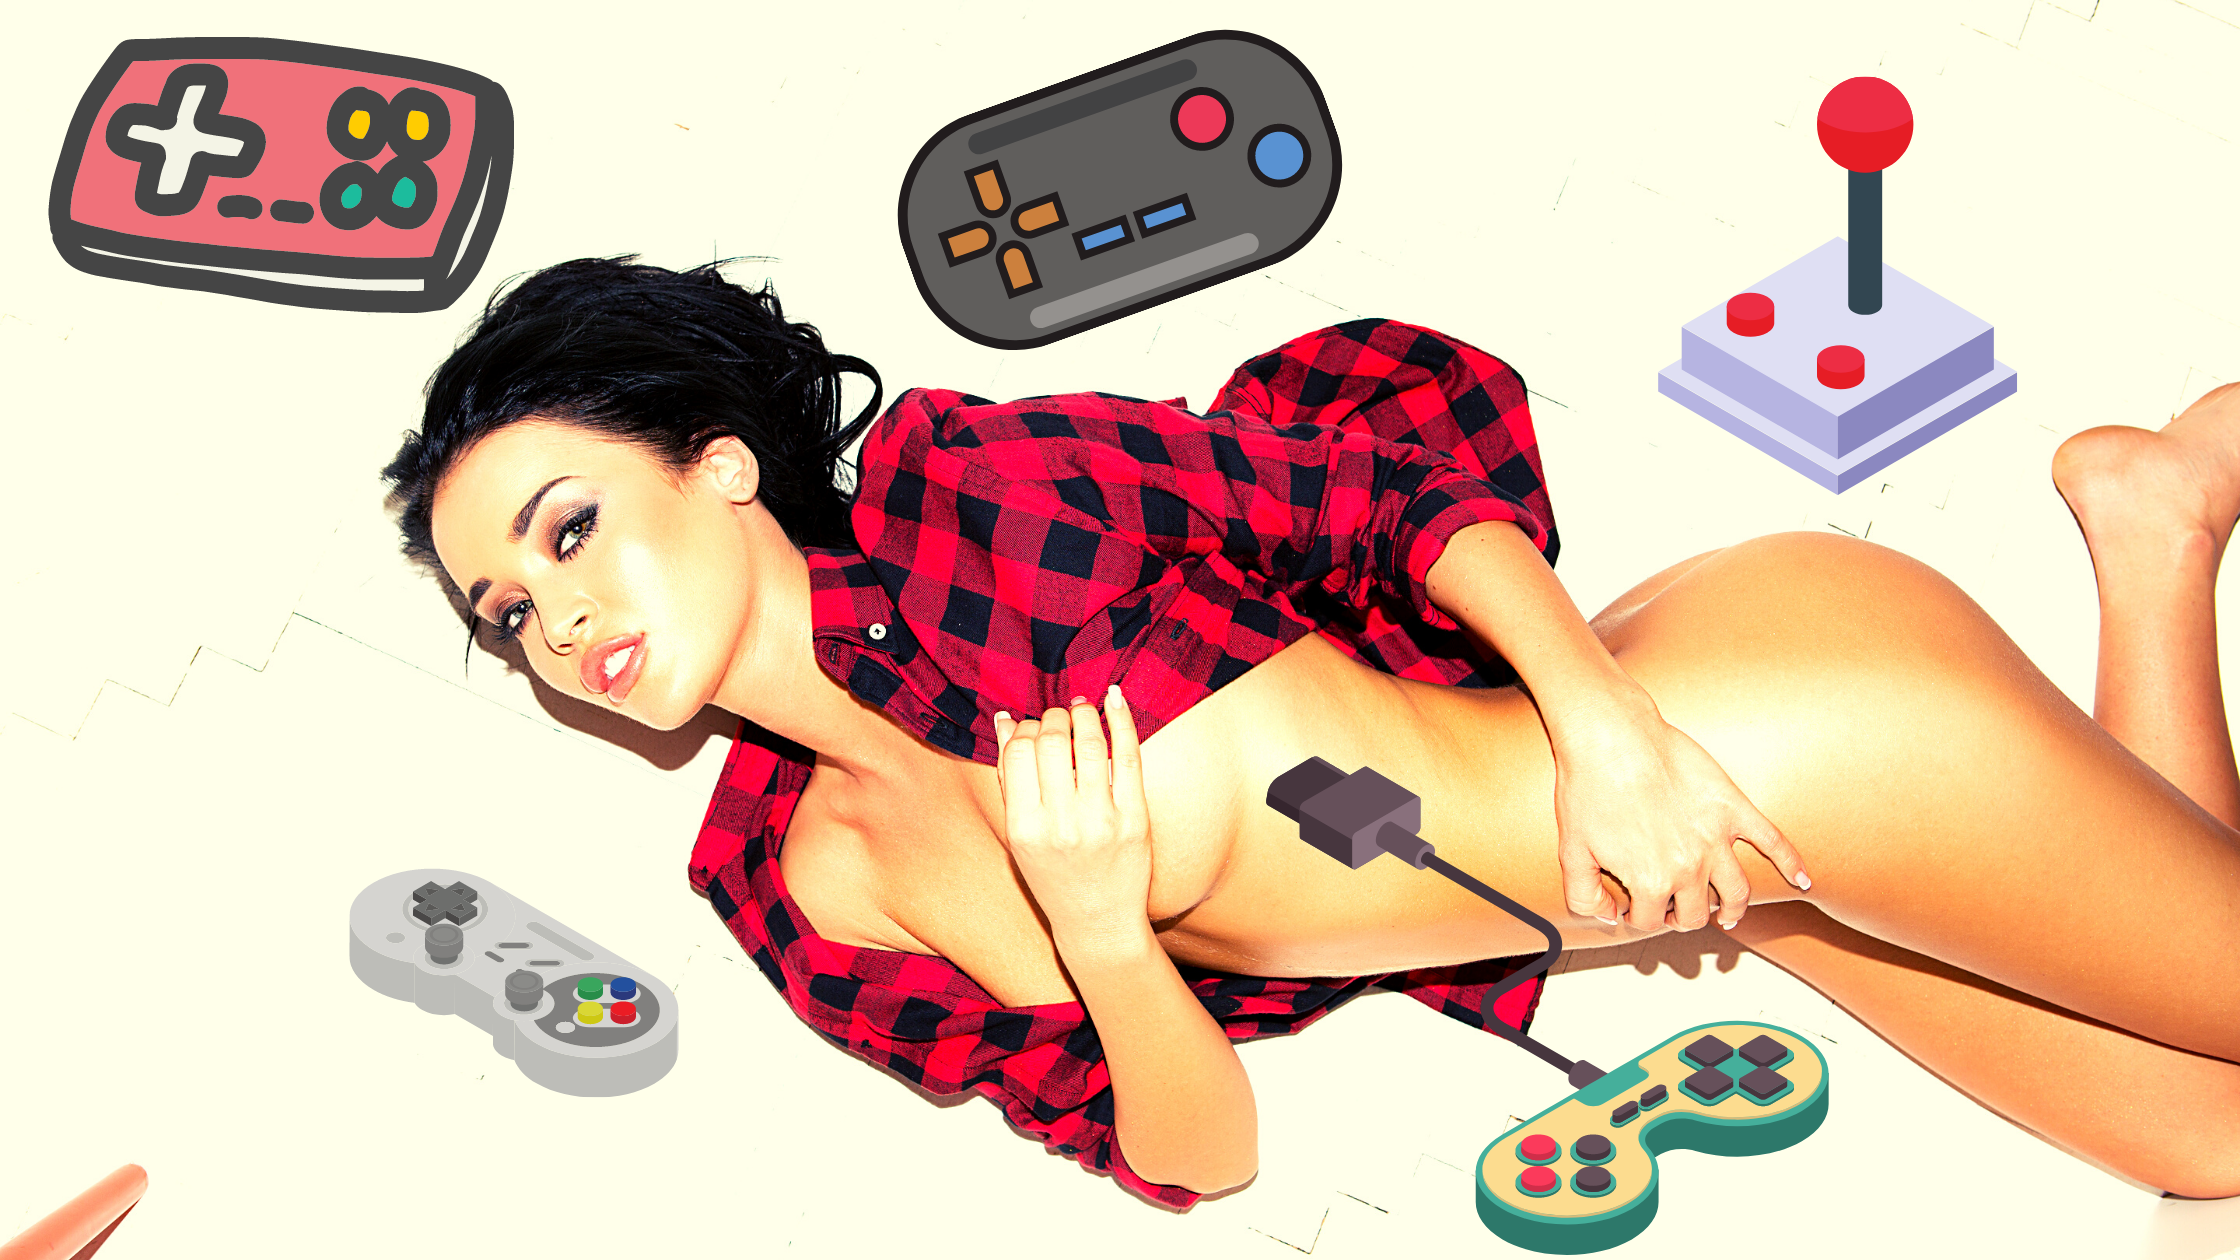 Nude gamer chick